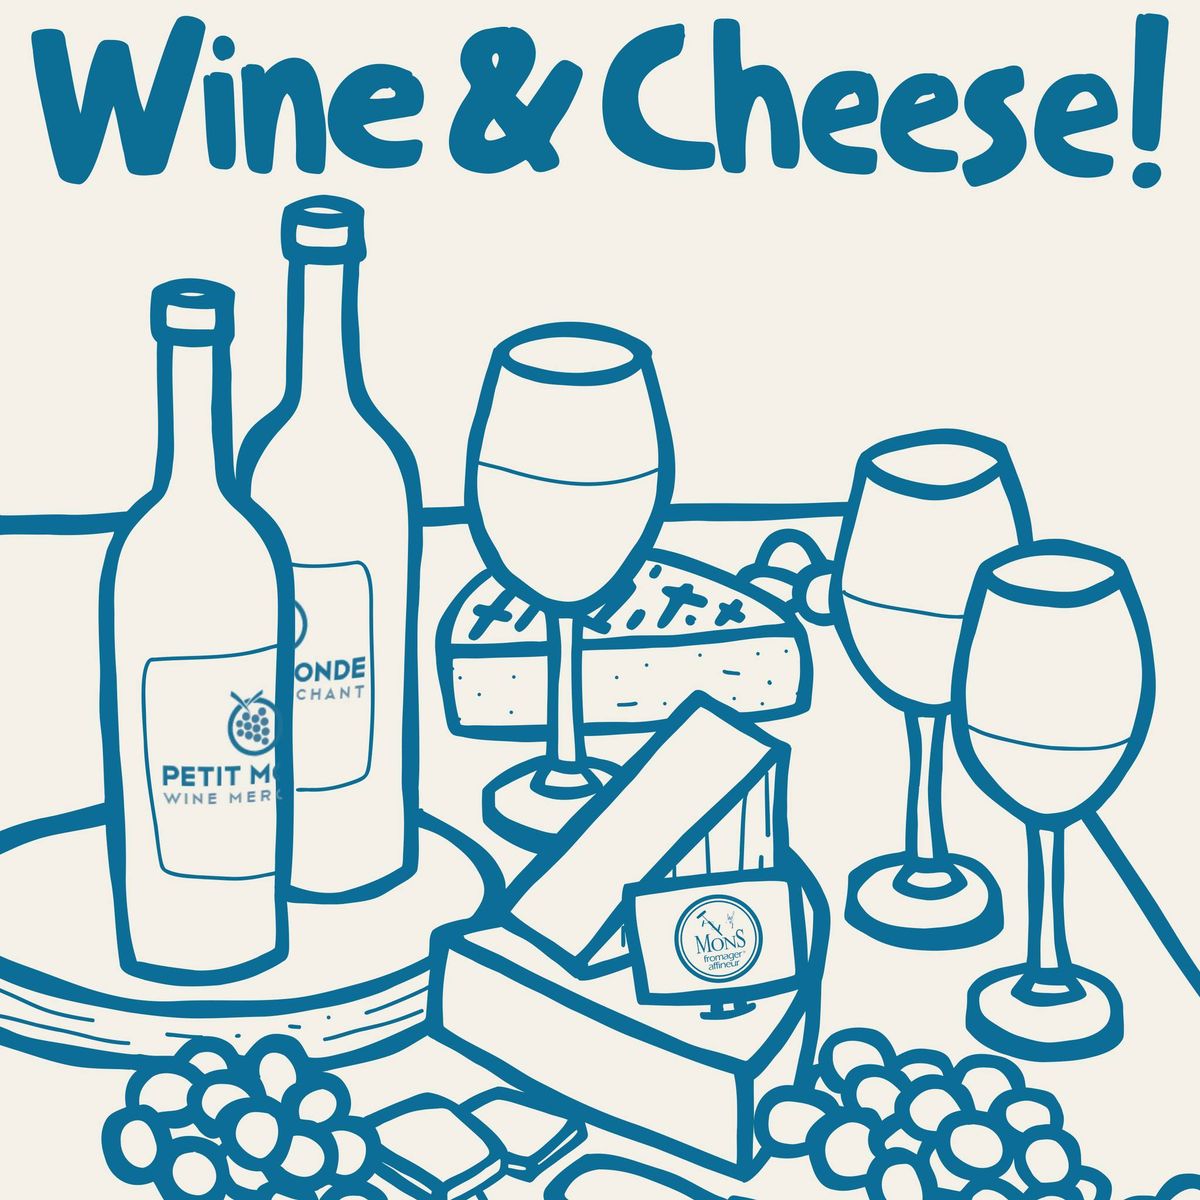 French Wine & Cheese Tasting